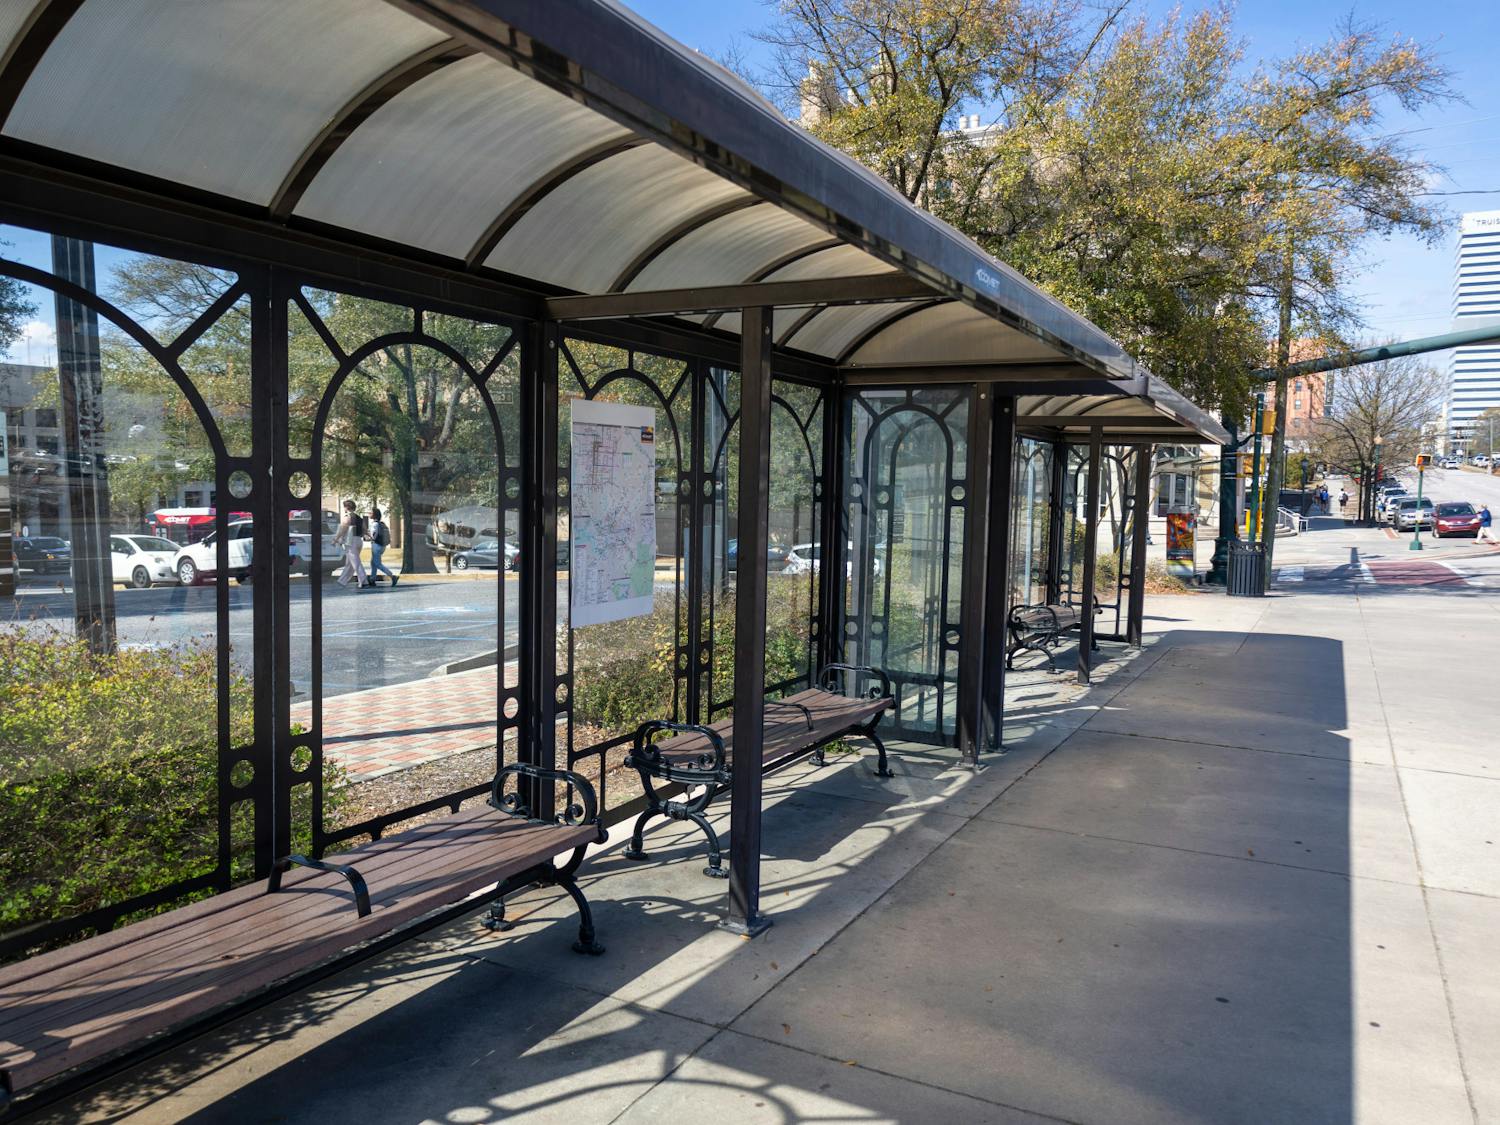 Sitting at the intersection between Assembly Street and College Street, the Comet bus stop is seen with bars in the middle of the benches on Feb. 23, 2023. The extra bar is seen as a way for the local authorities to stop people from being able to lay down on the benches. &nbsp;